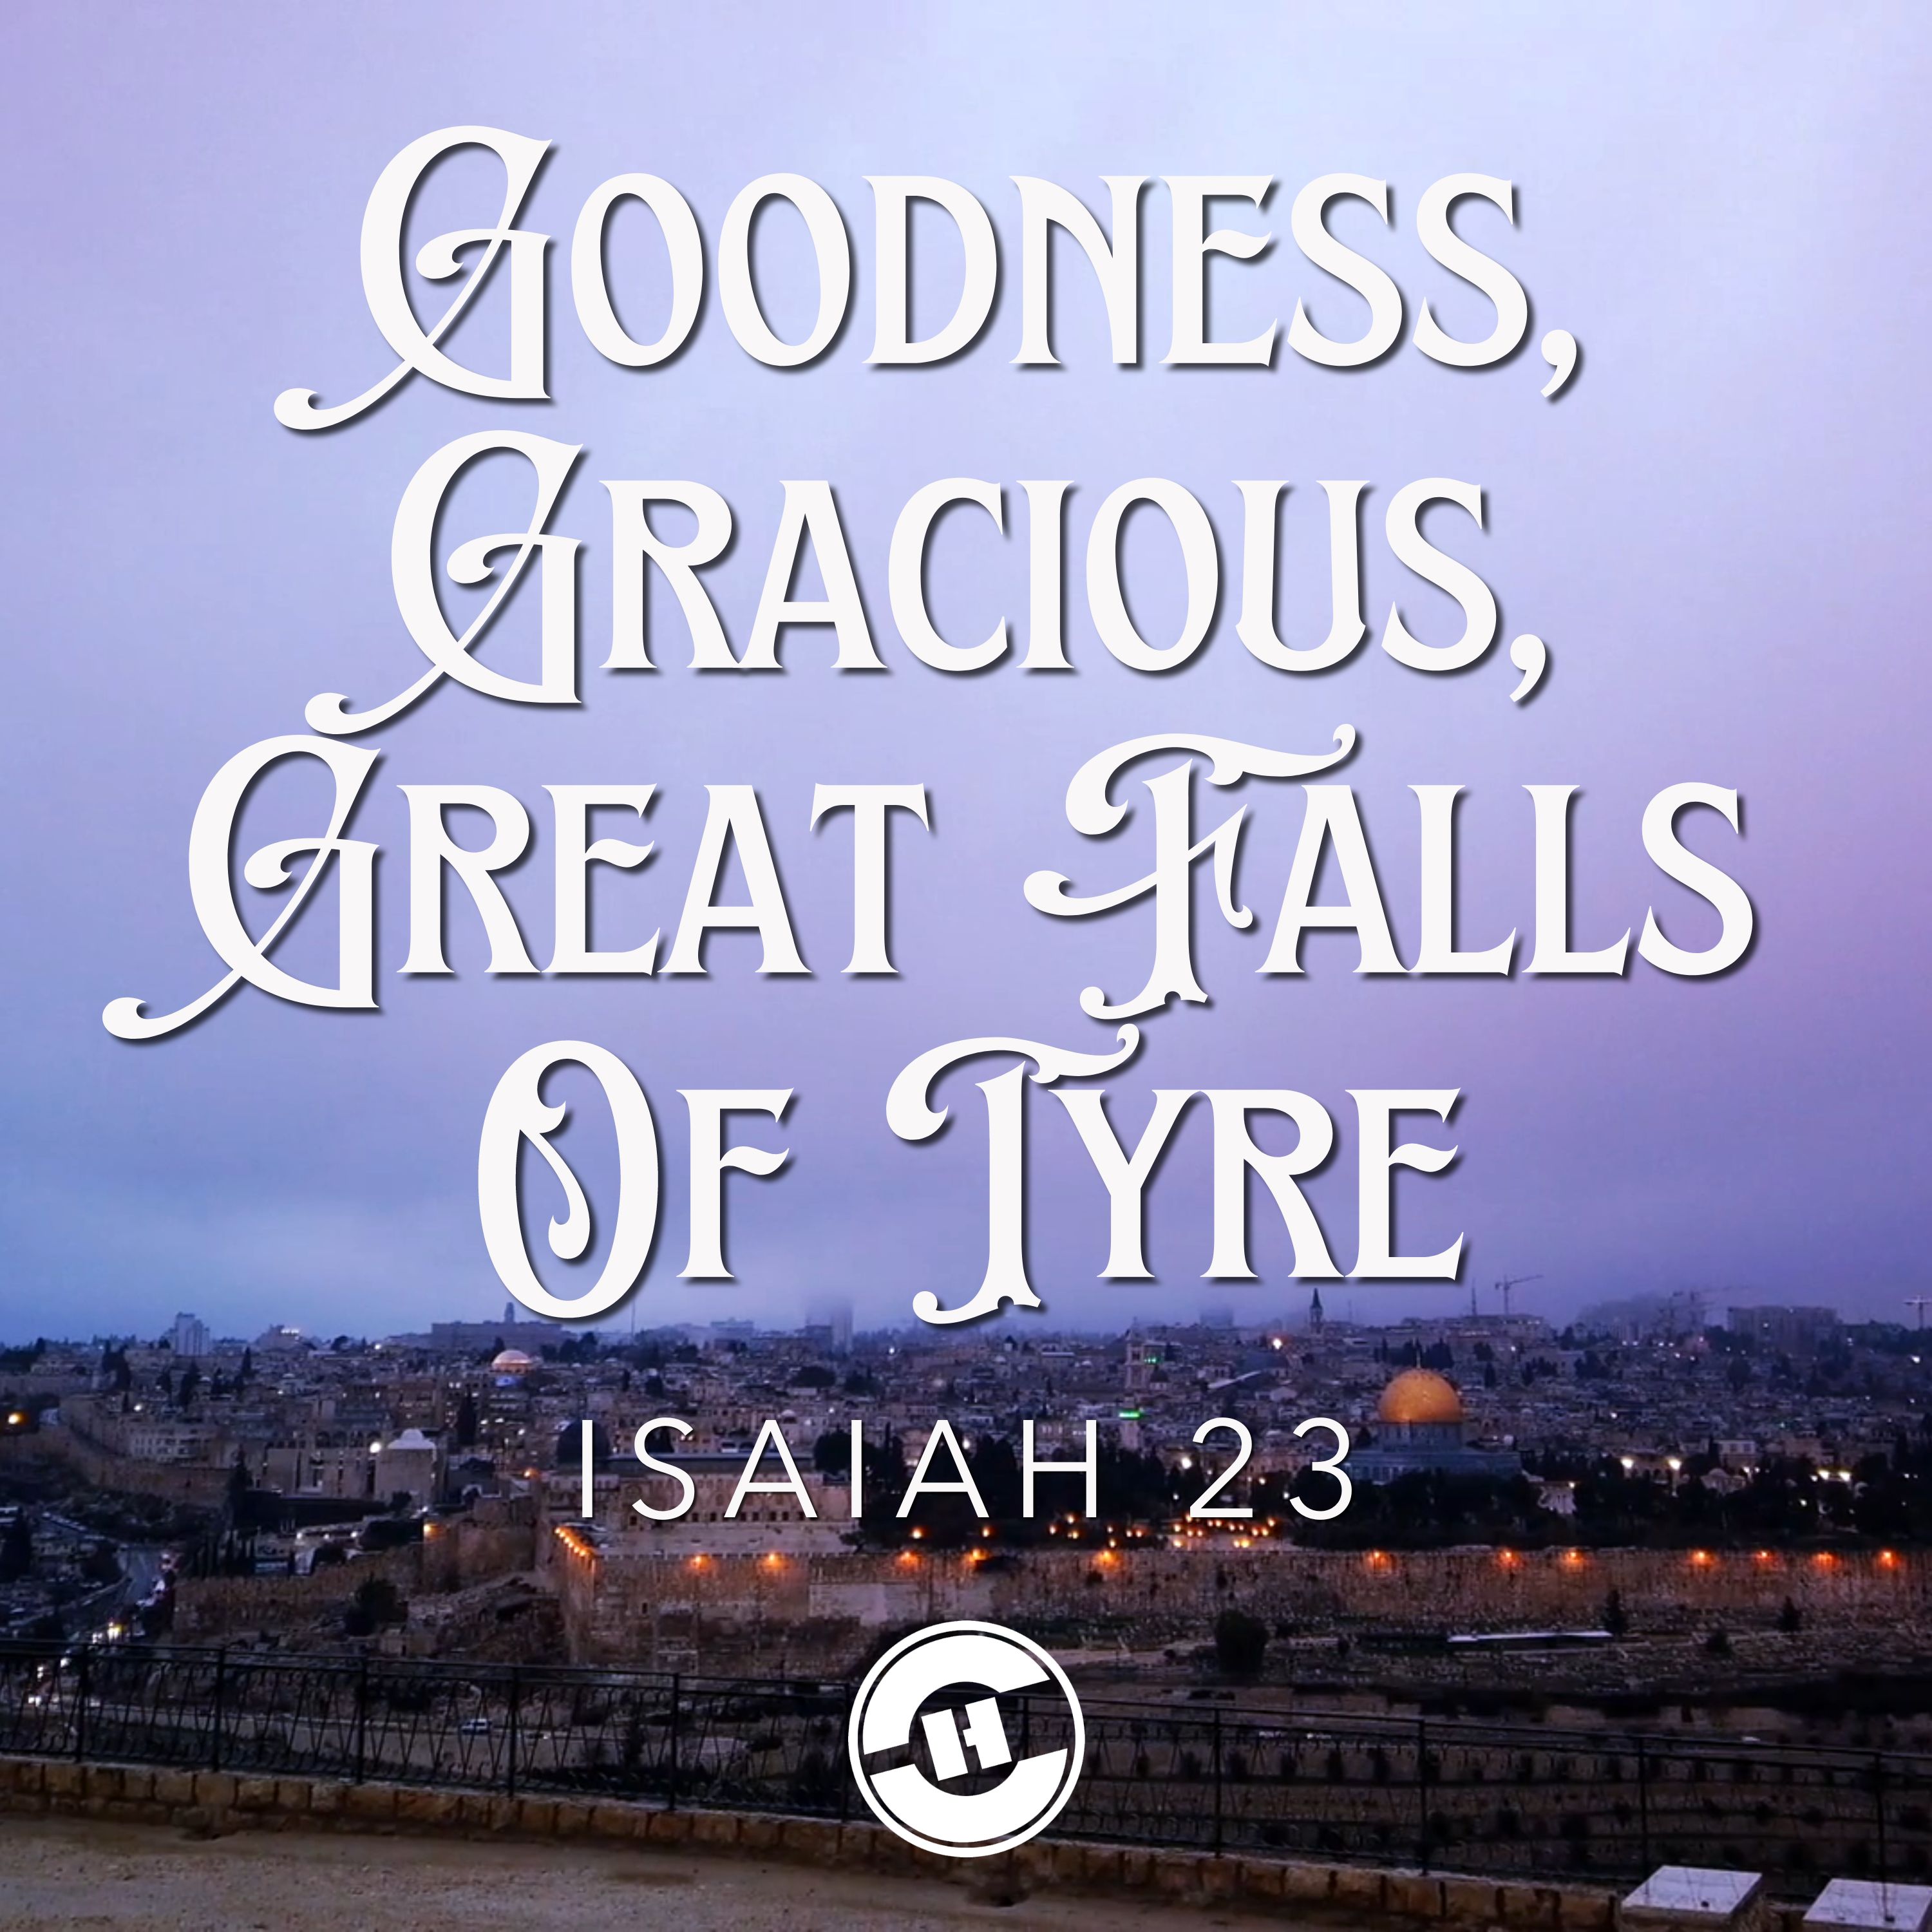 Isaiah 23:1-18 – Goodness, Gracious, Great Falls Of Tyre